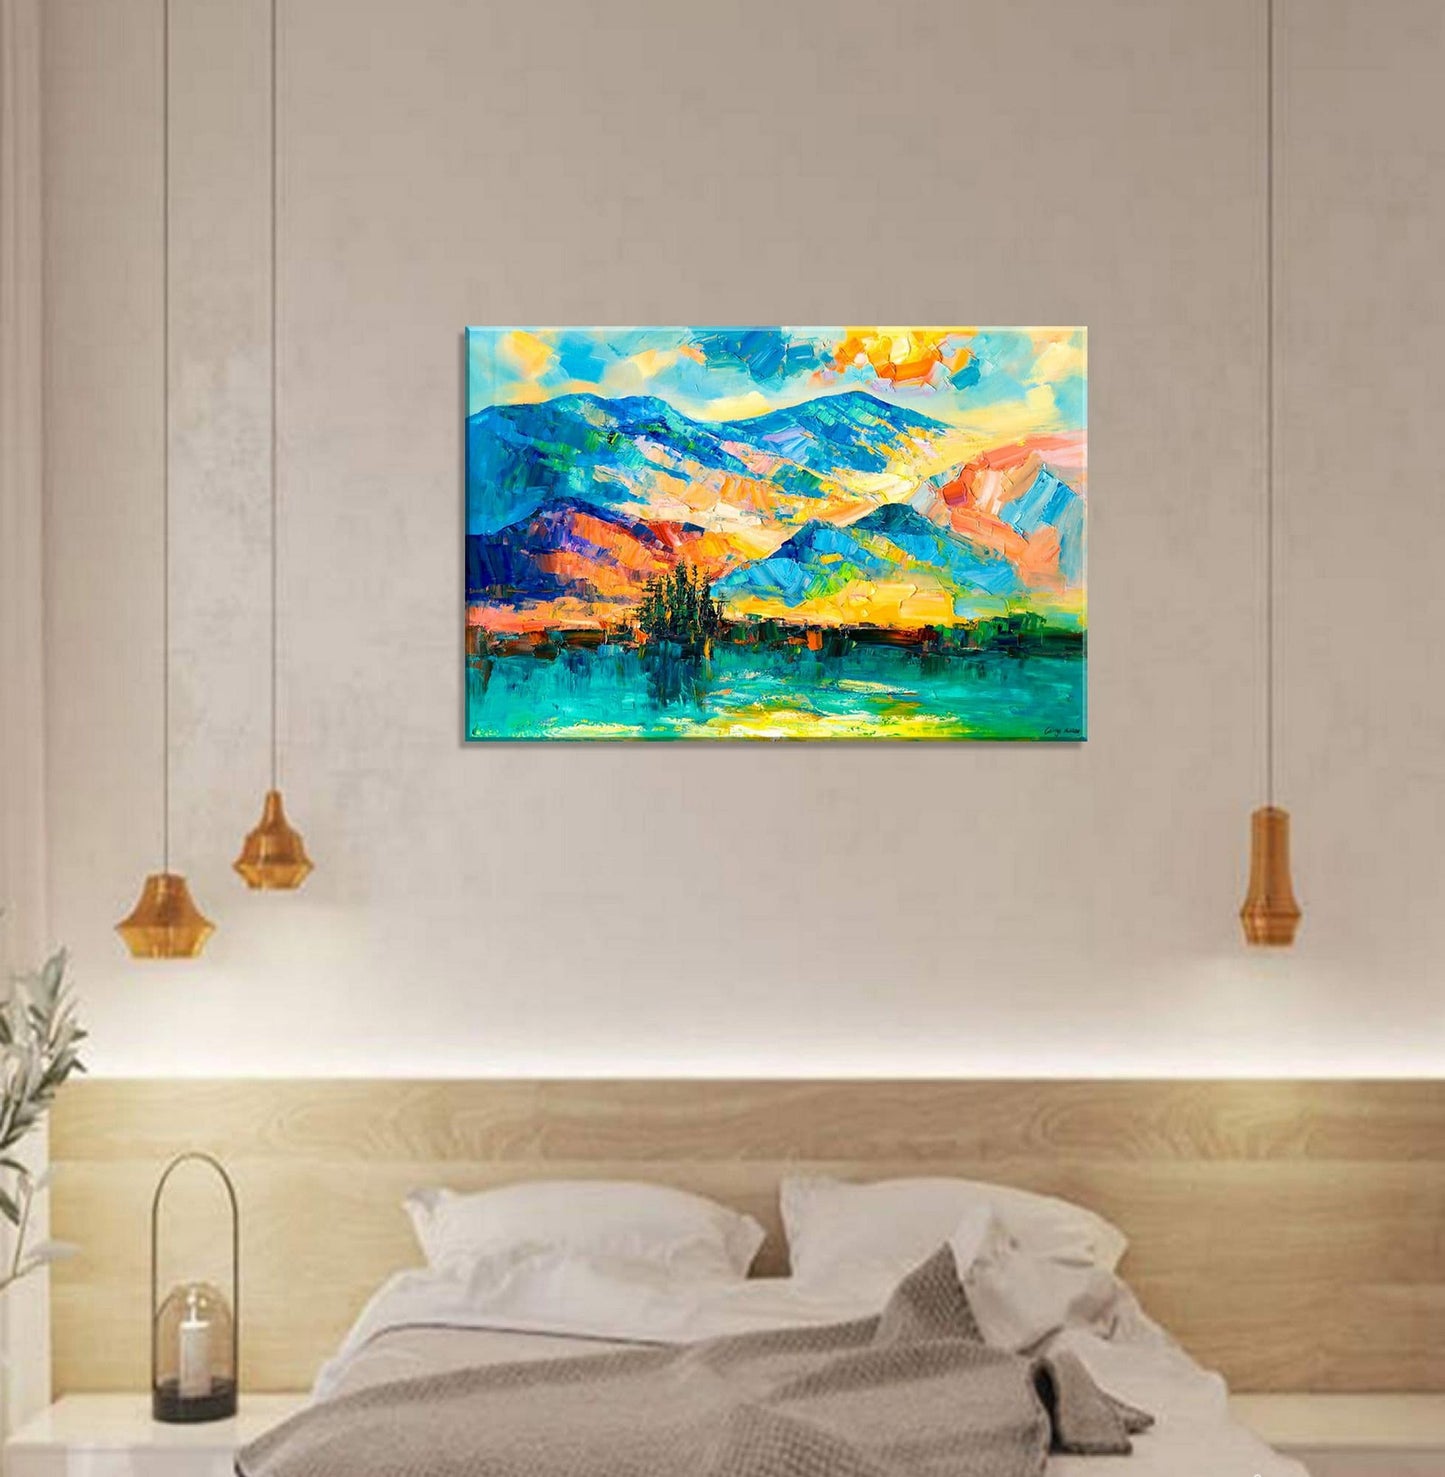 Oil Painting Abstract Landscape, Original Abstract Painting, Large Abstract Painting, Landscape Oil Painting, Living Room Art, Canvas Art